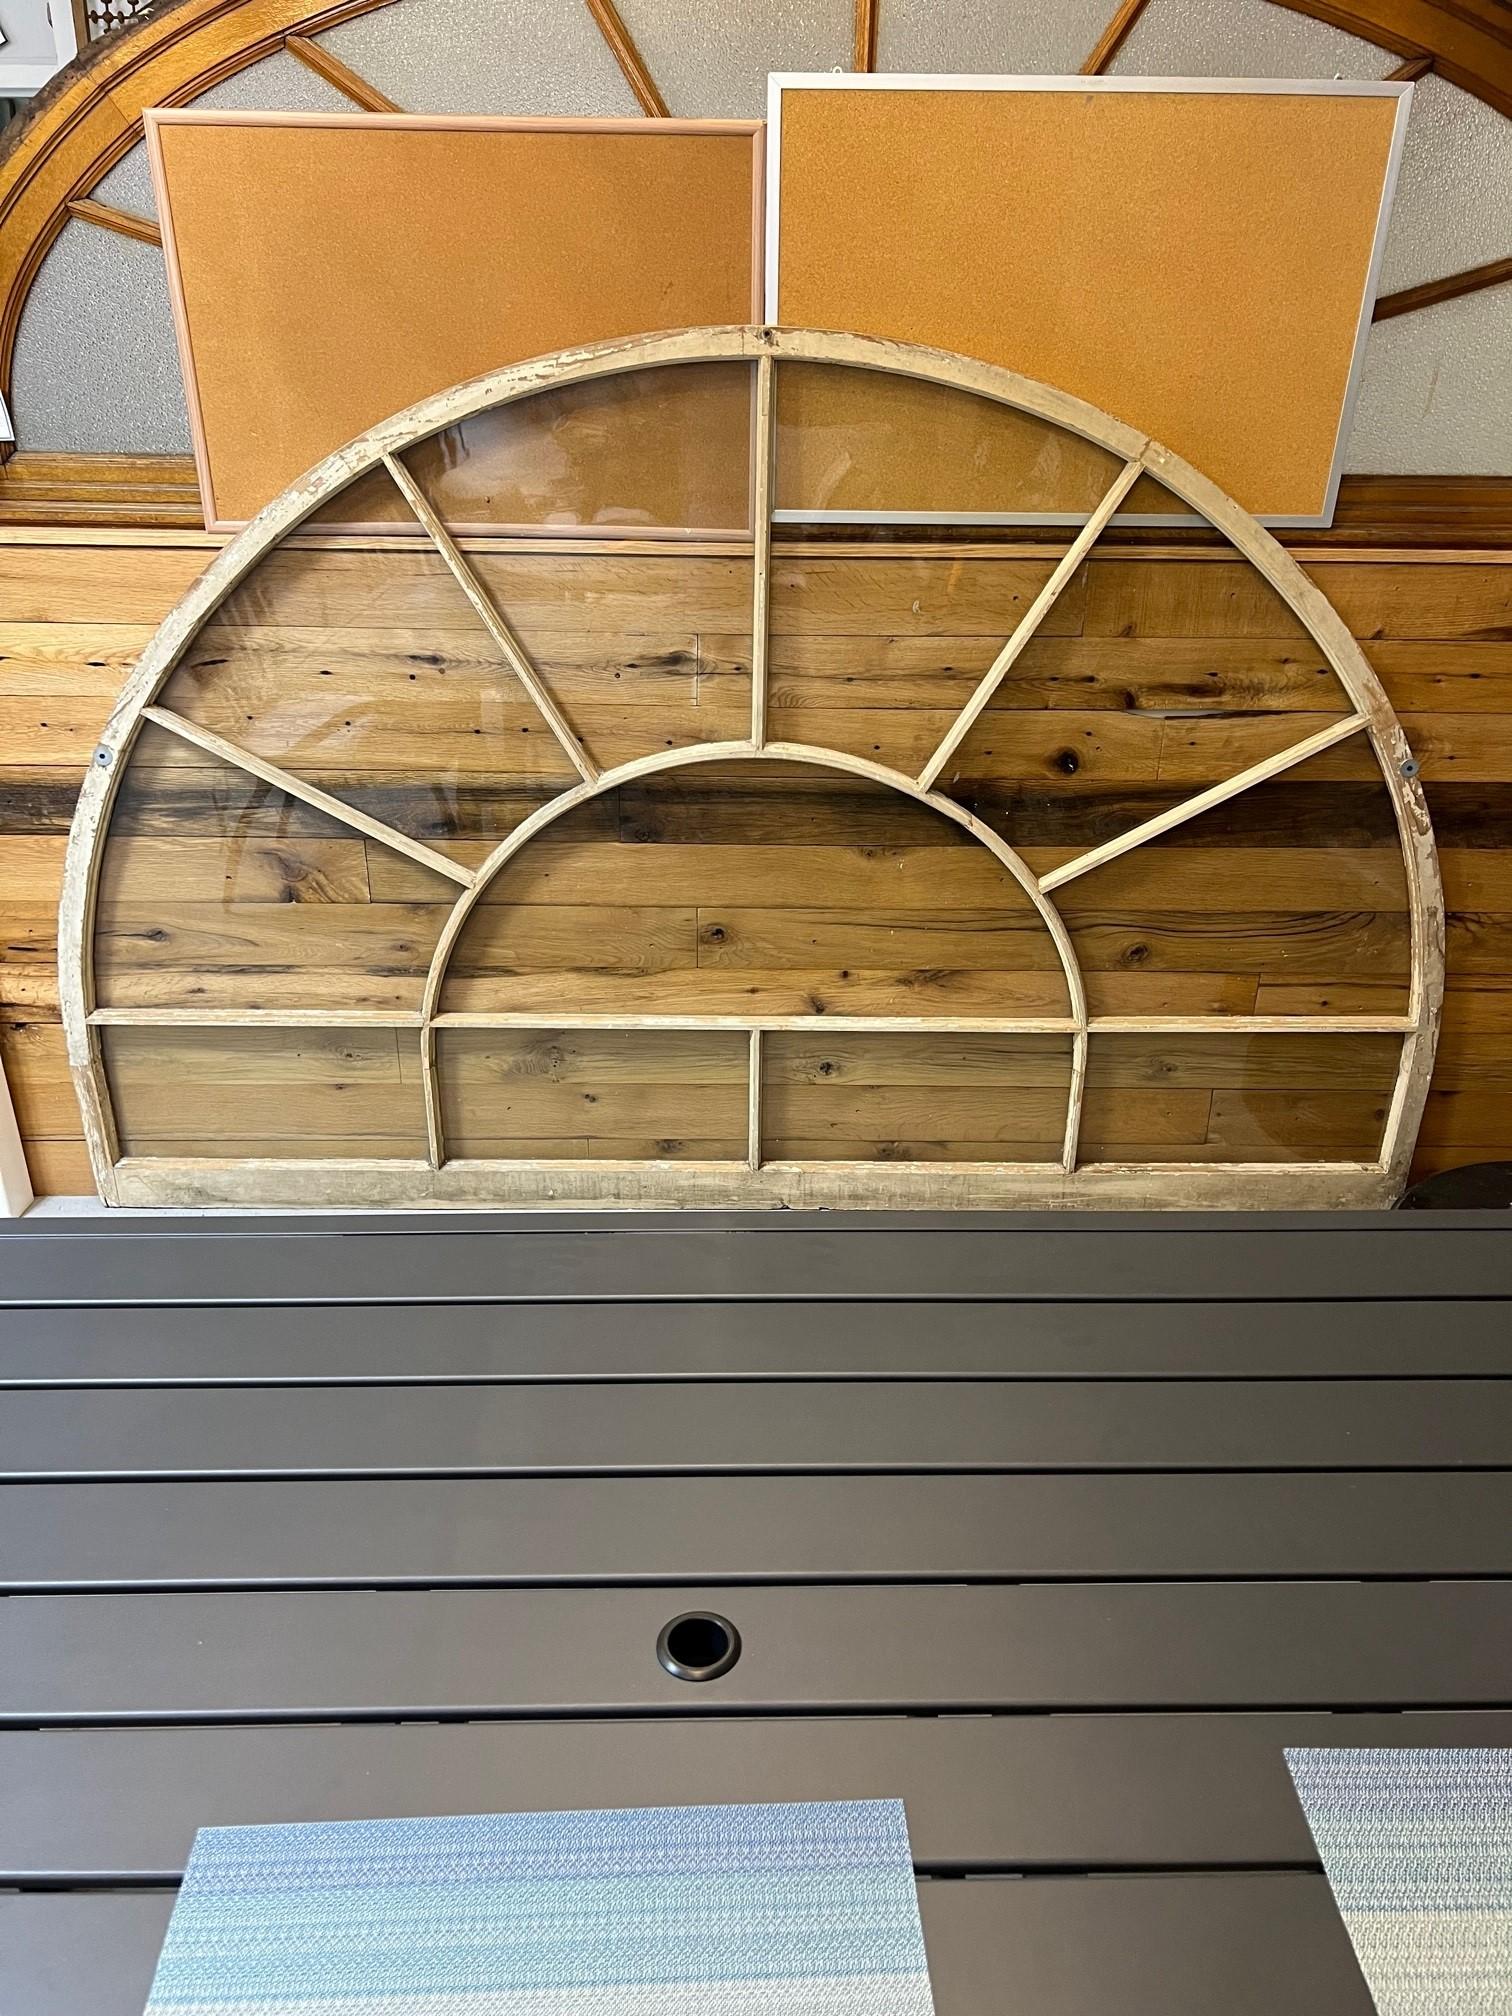 Antique very large arched transom window with original glass in a wood frame. Salvaged from a large estate on the Stamford-Greenwich Ct. border. This is the last one of nine windows salvaged from the estate built in the early 1900s. The window is a